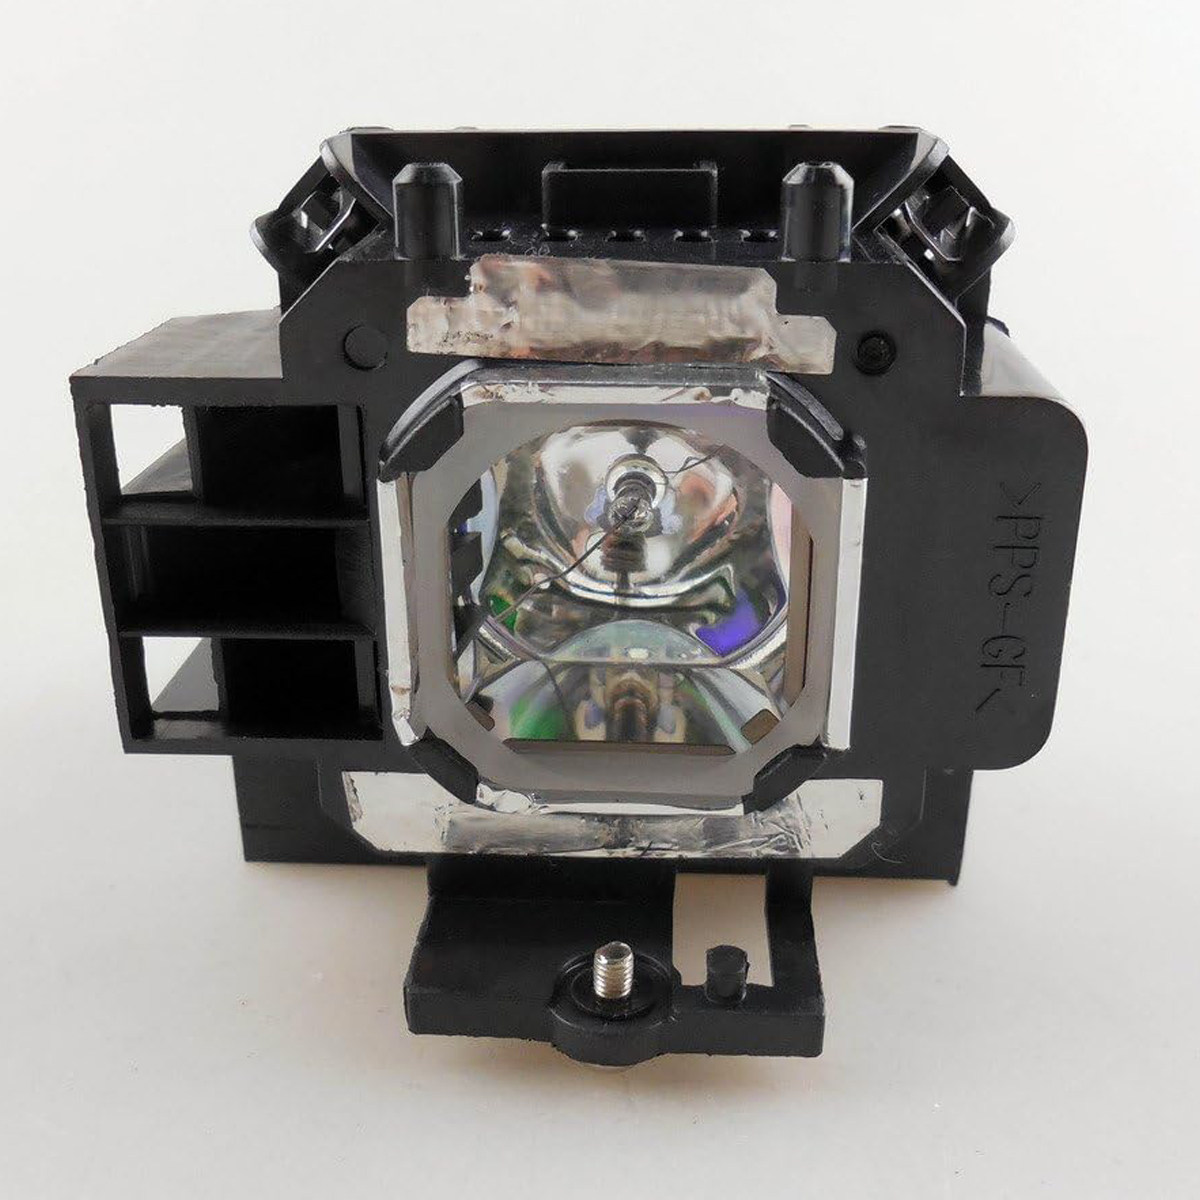 Replacement Projector lamp LV-LP32/4330B001 For CANON LV-7280/LV-7285/ LV-7380